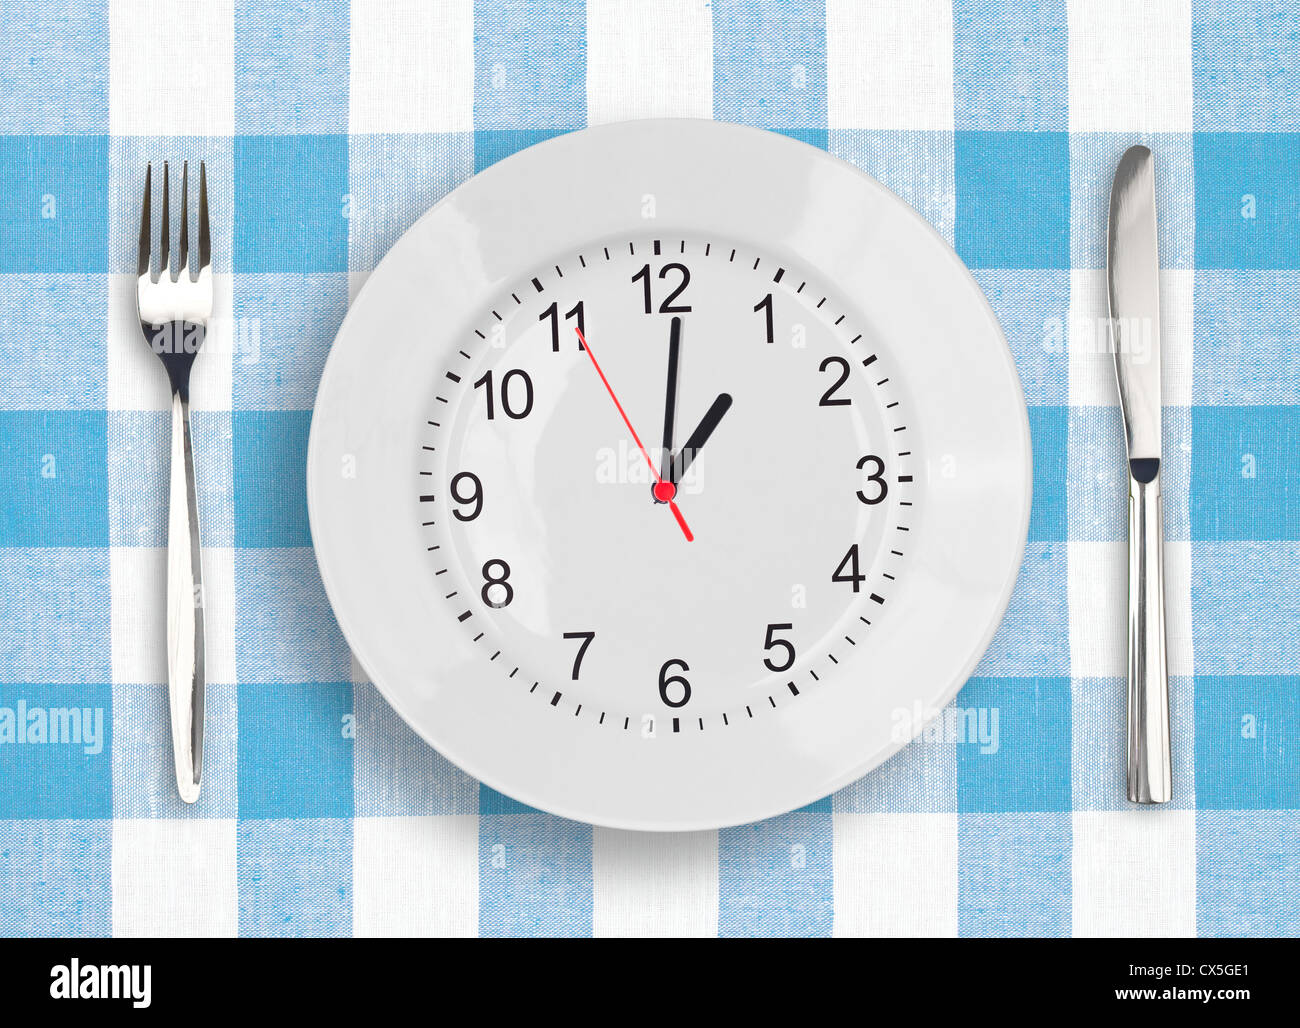 Lunch time concept Stock Photo